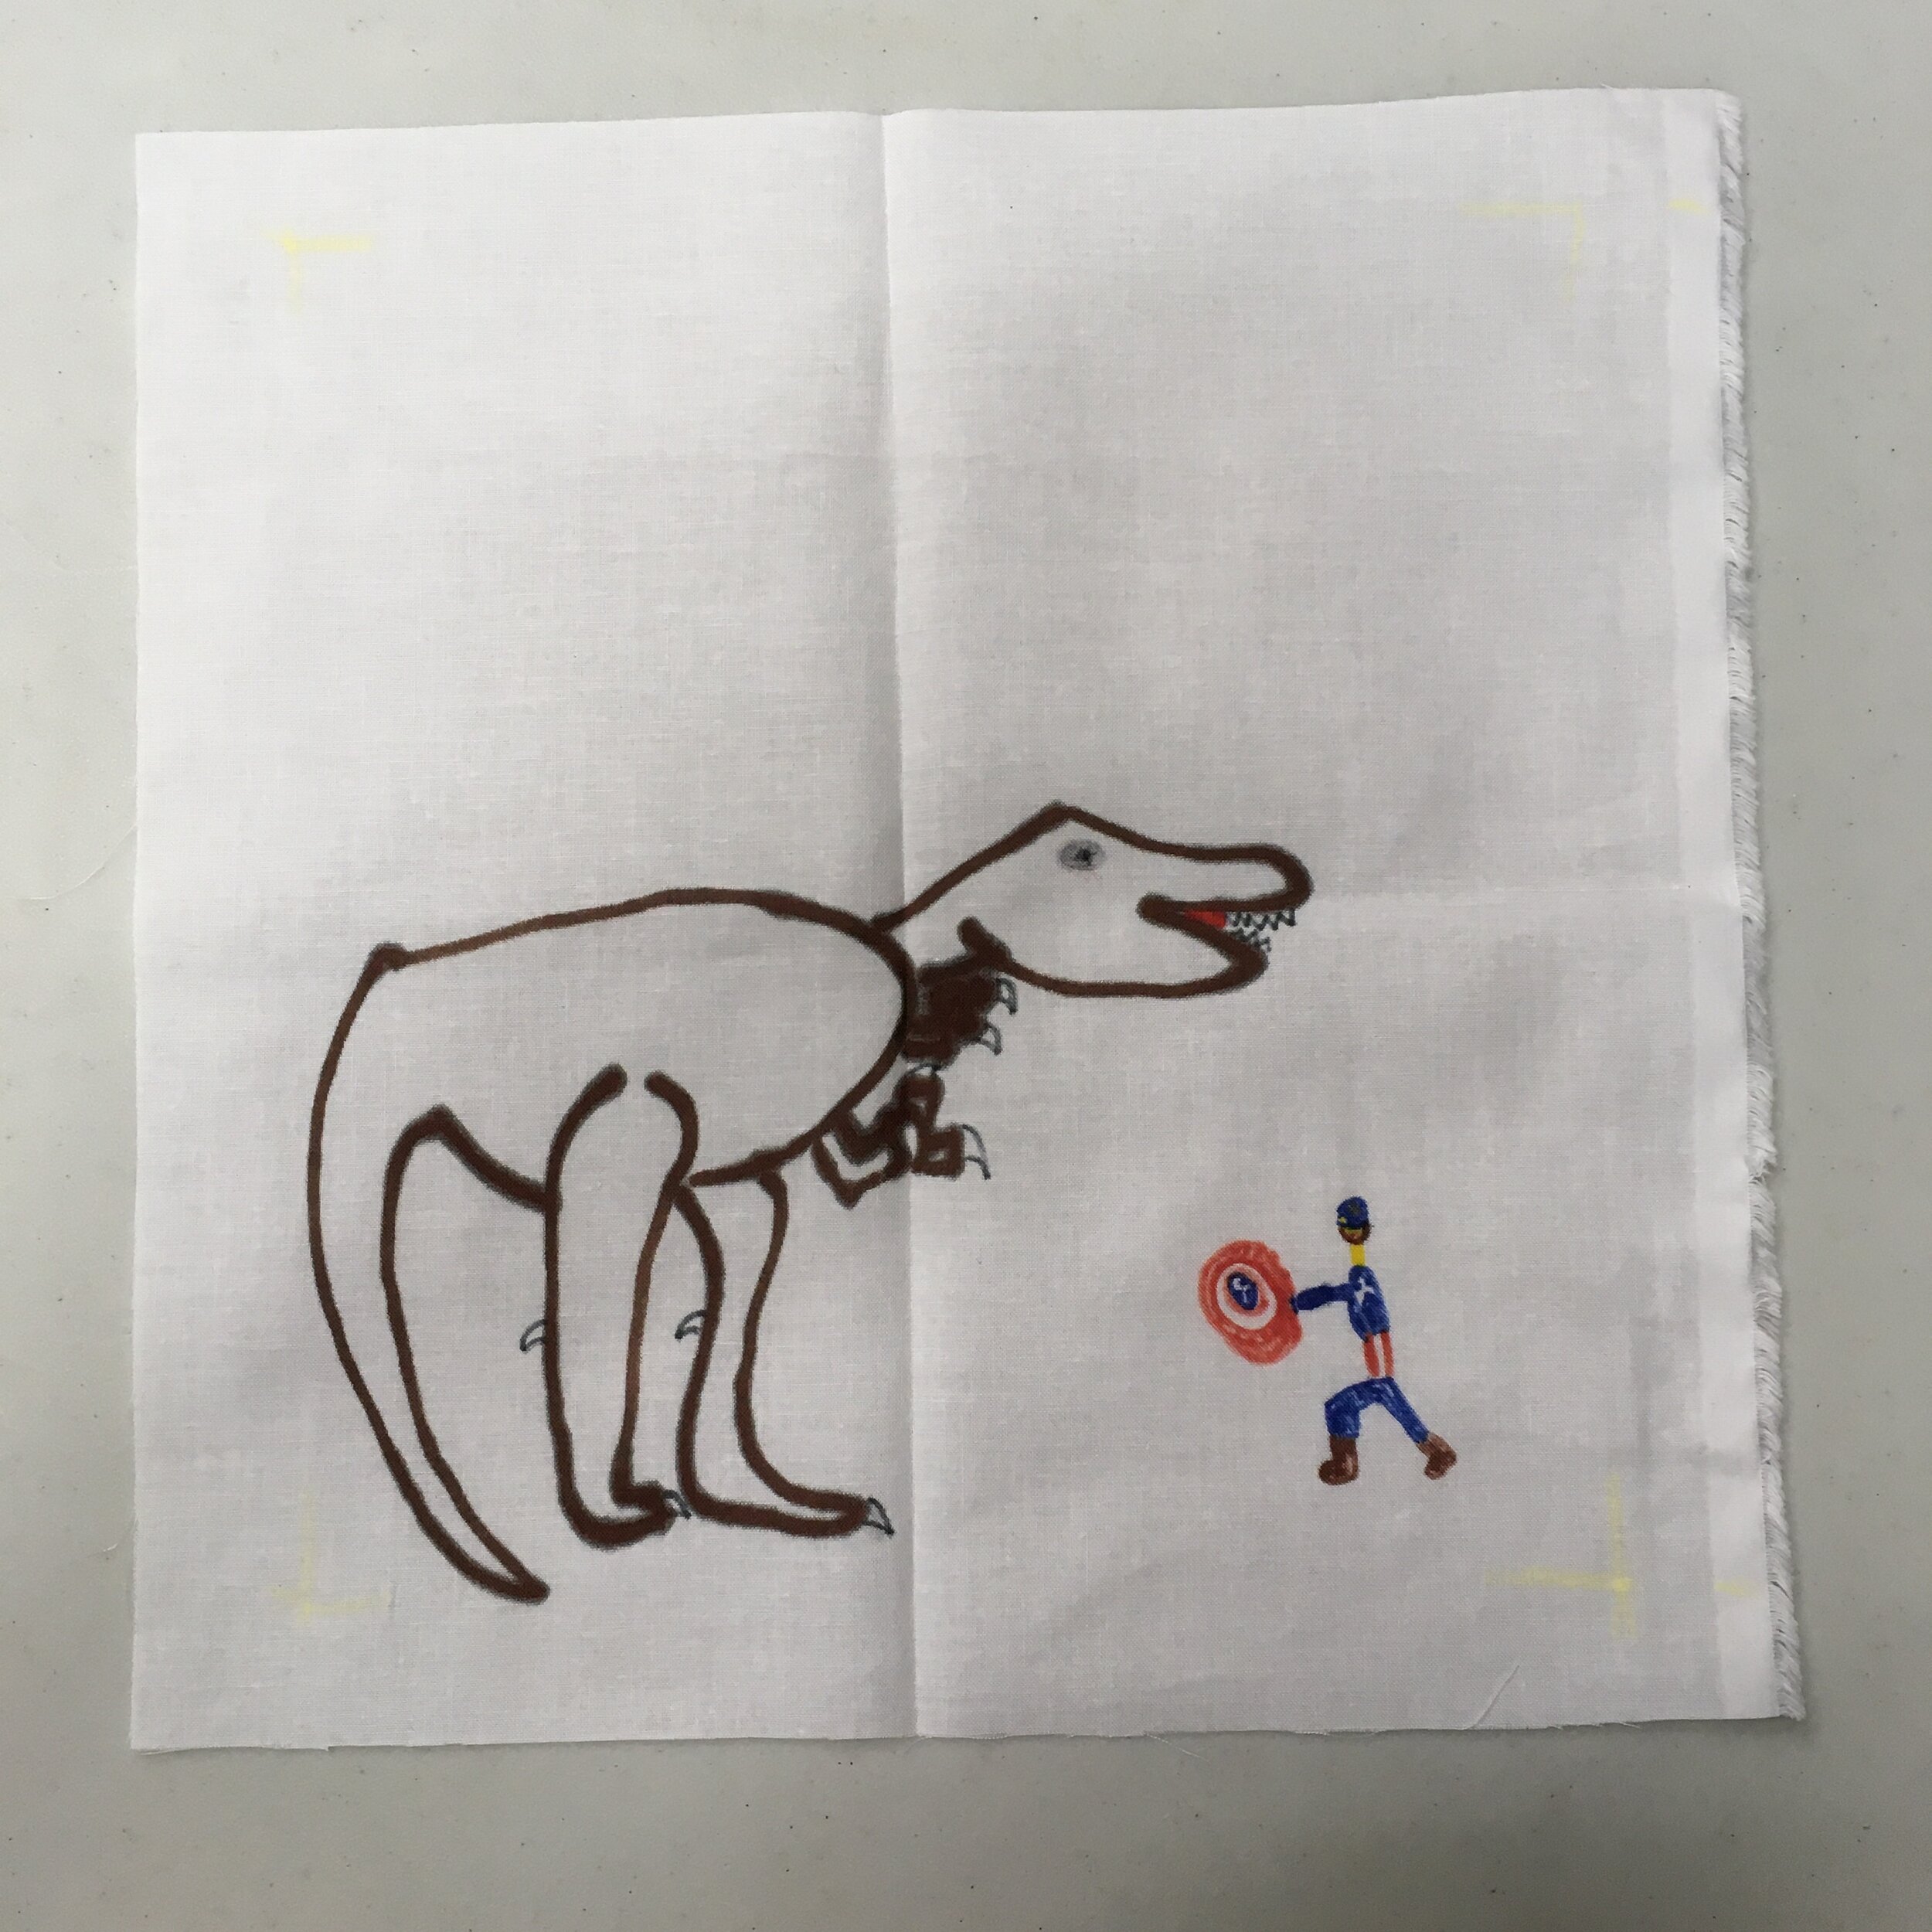  Braden K (7 years old) "T-Rex and Captain America"